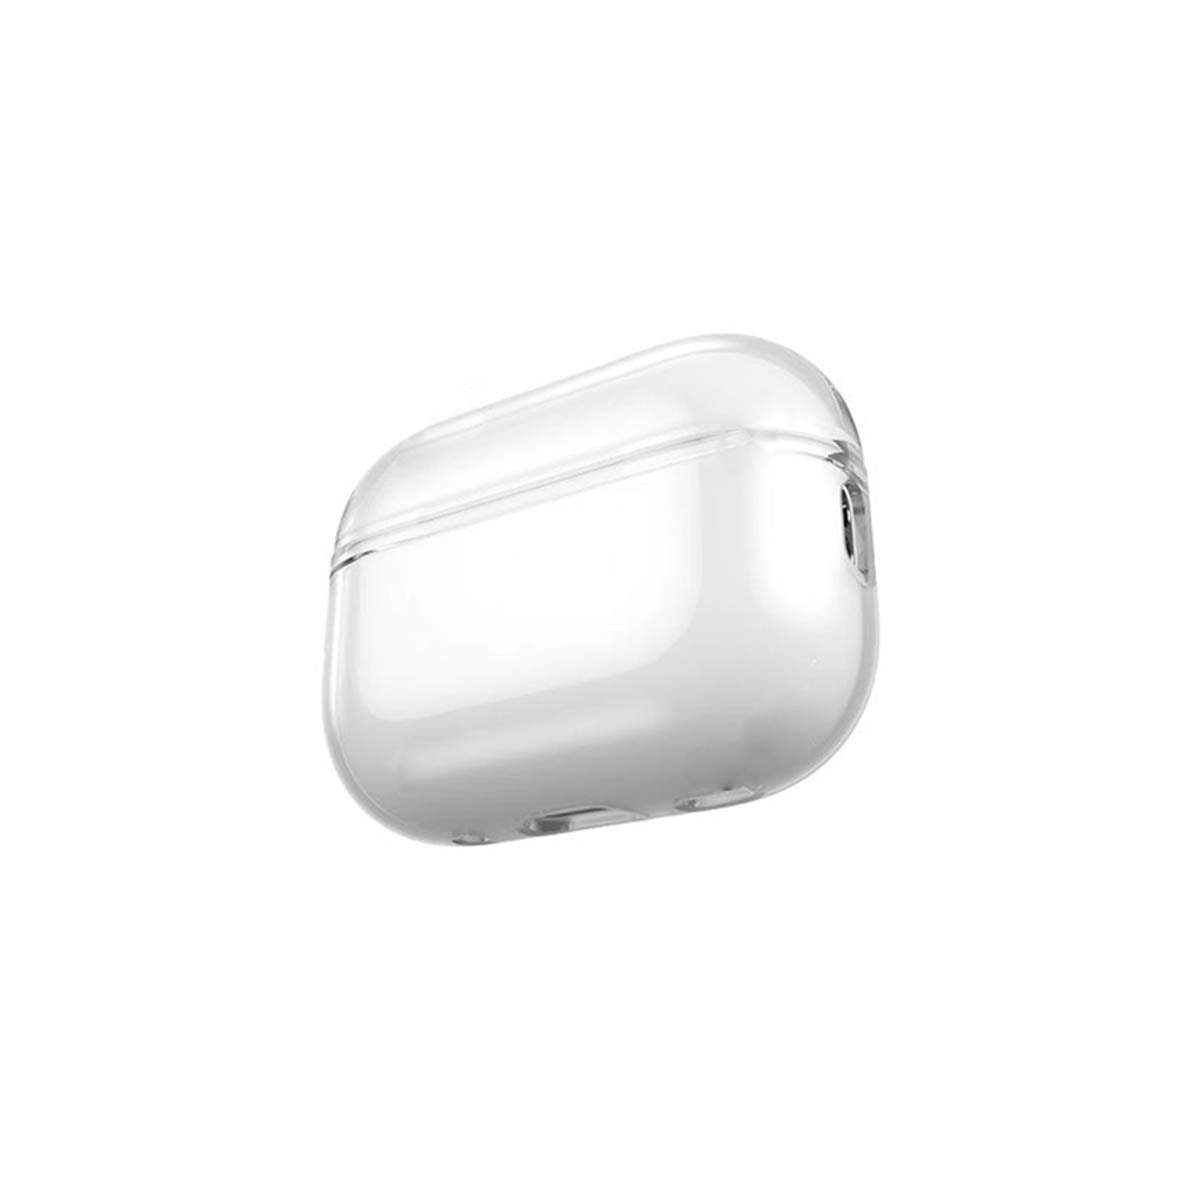 COTECi Crystal Transparent Protective Case for AirPod Pro 2